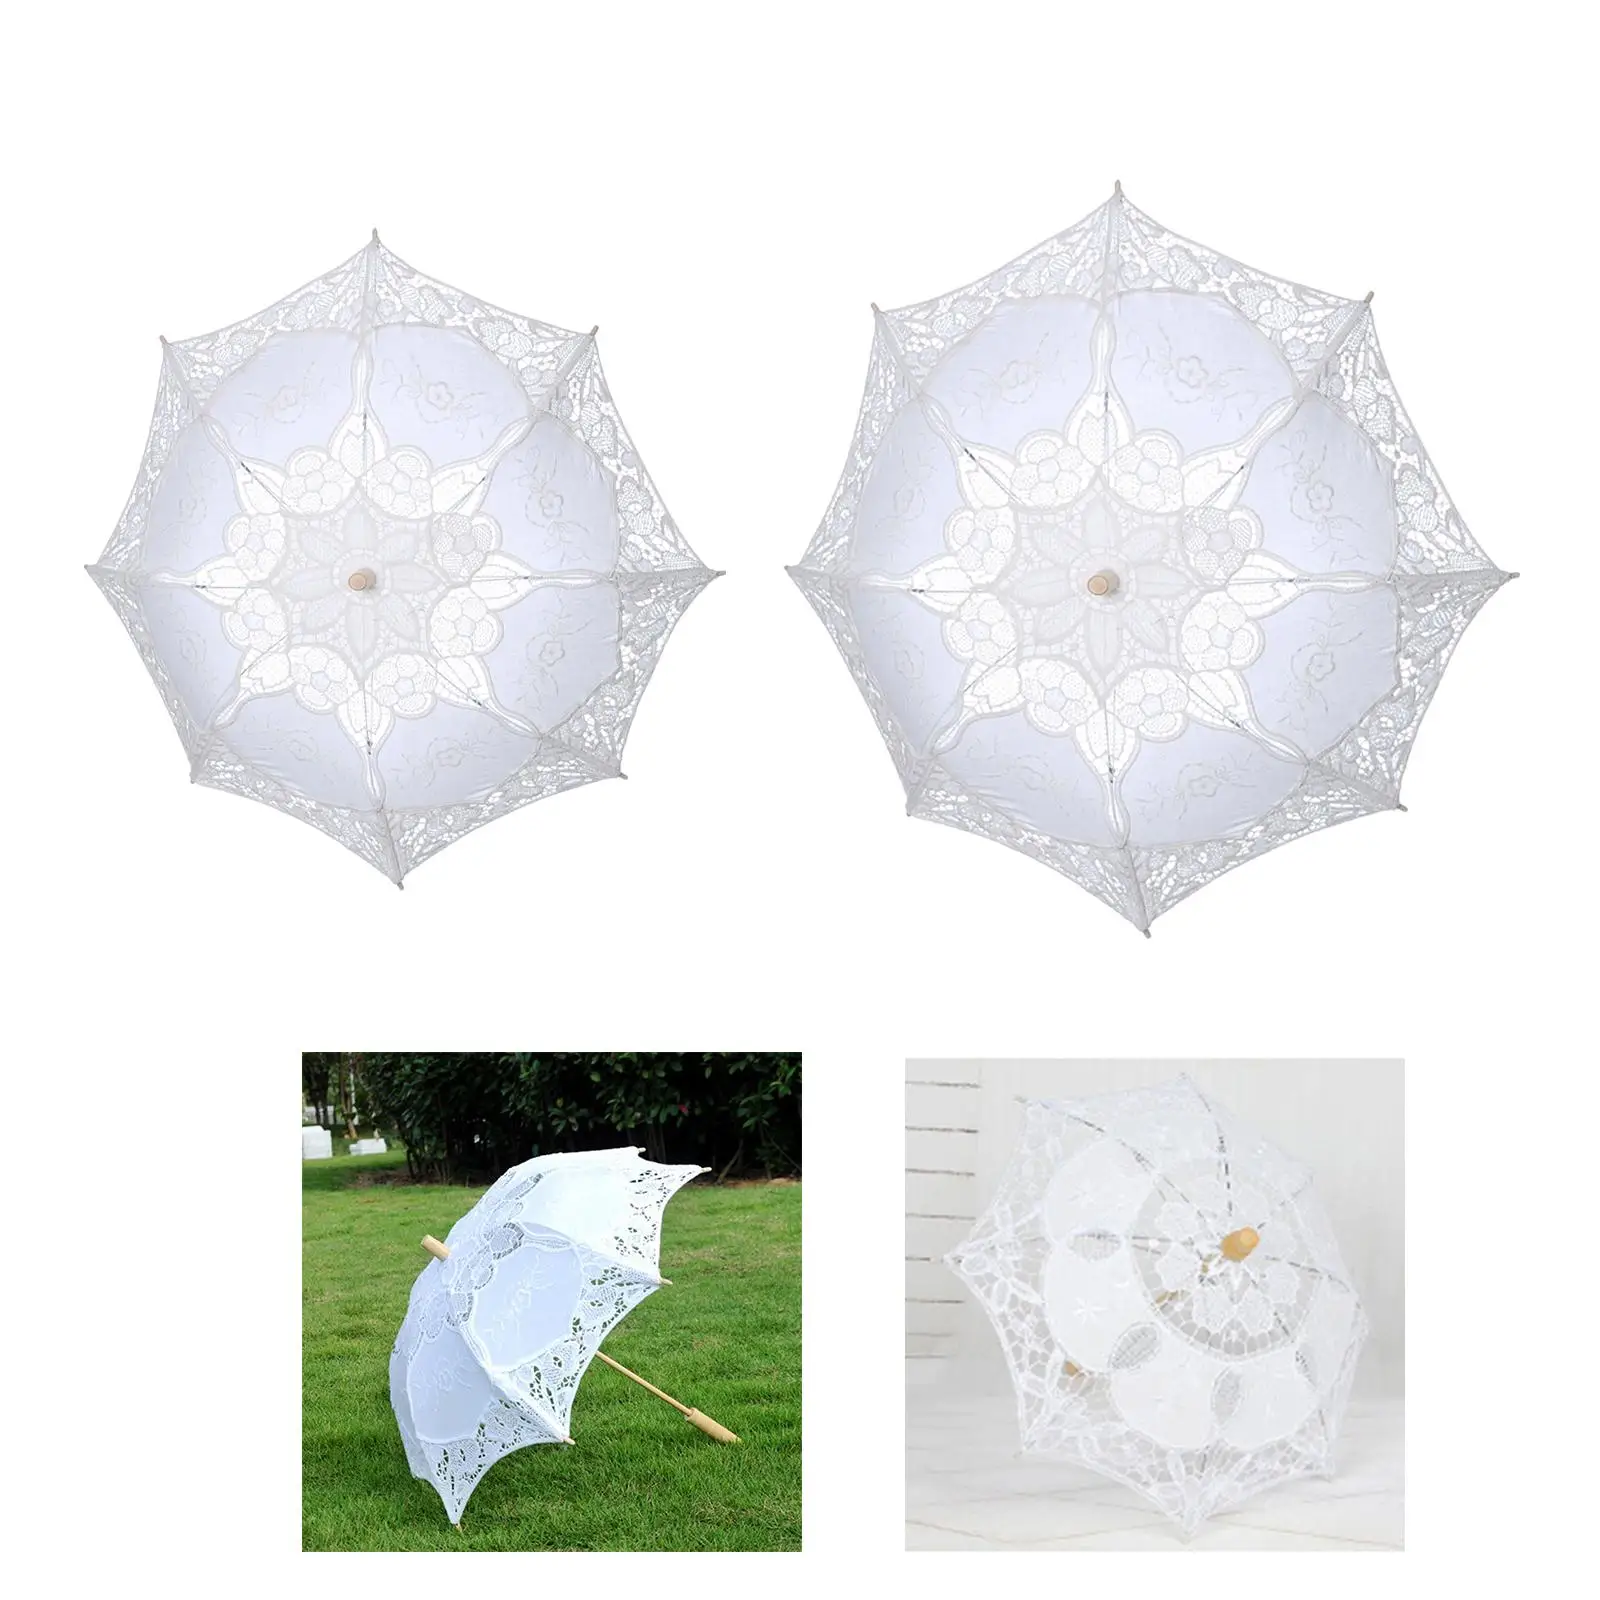 Elegant Lace Umbrella with Wooden Handle for Wedding Photography Prop